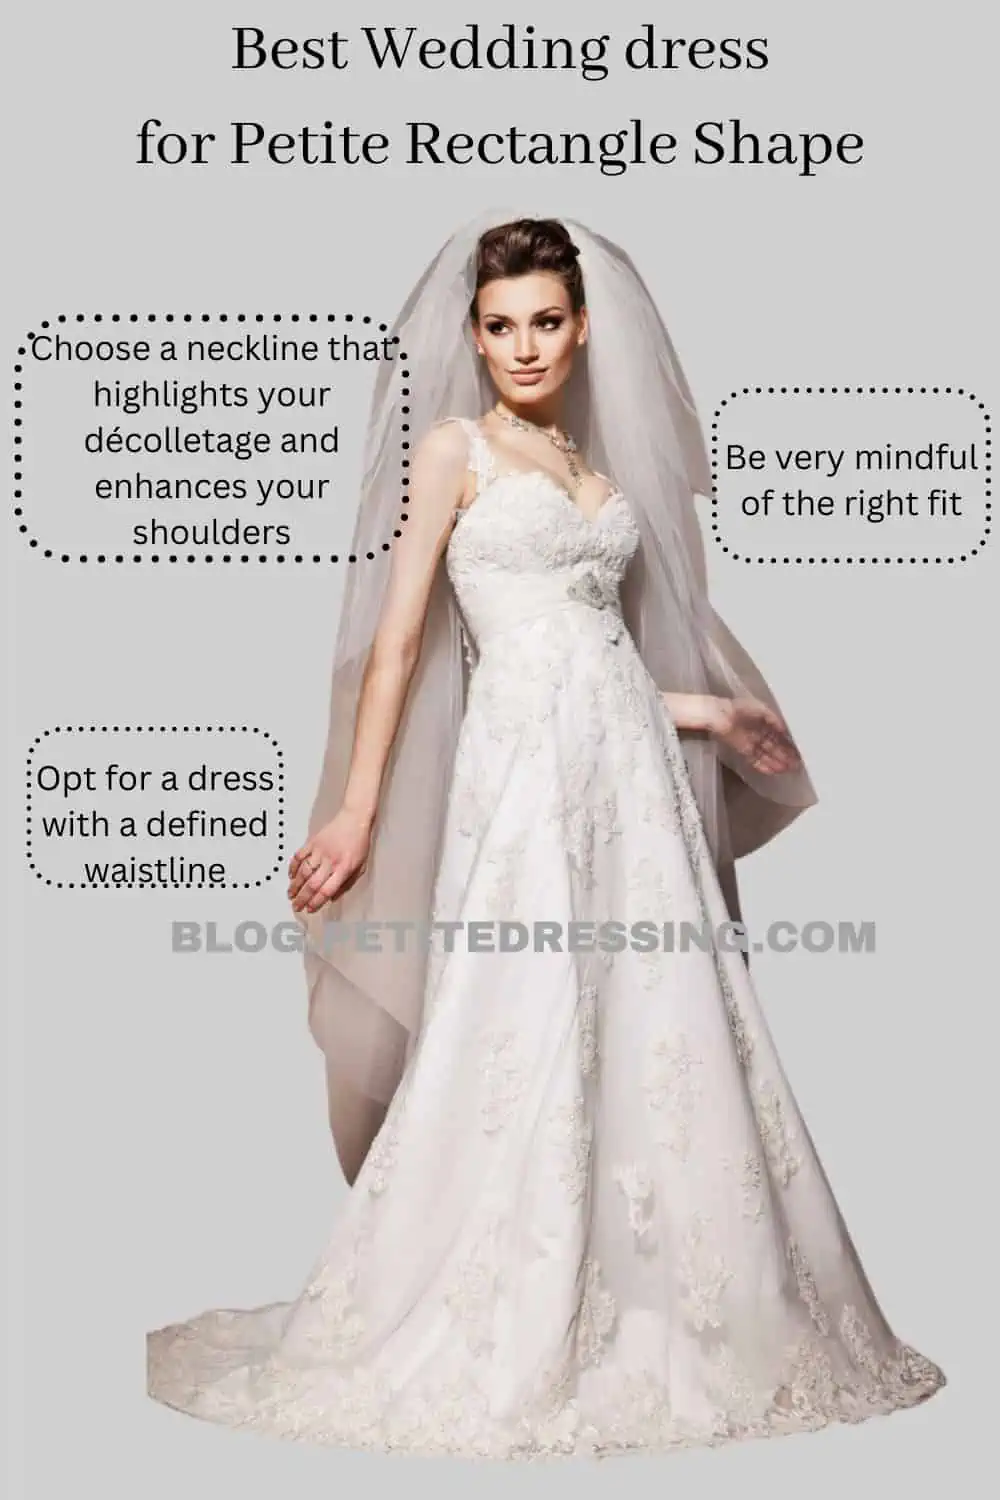 New guide to the best wedding style for body shape in 2022